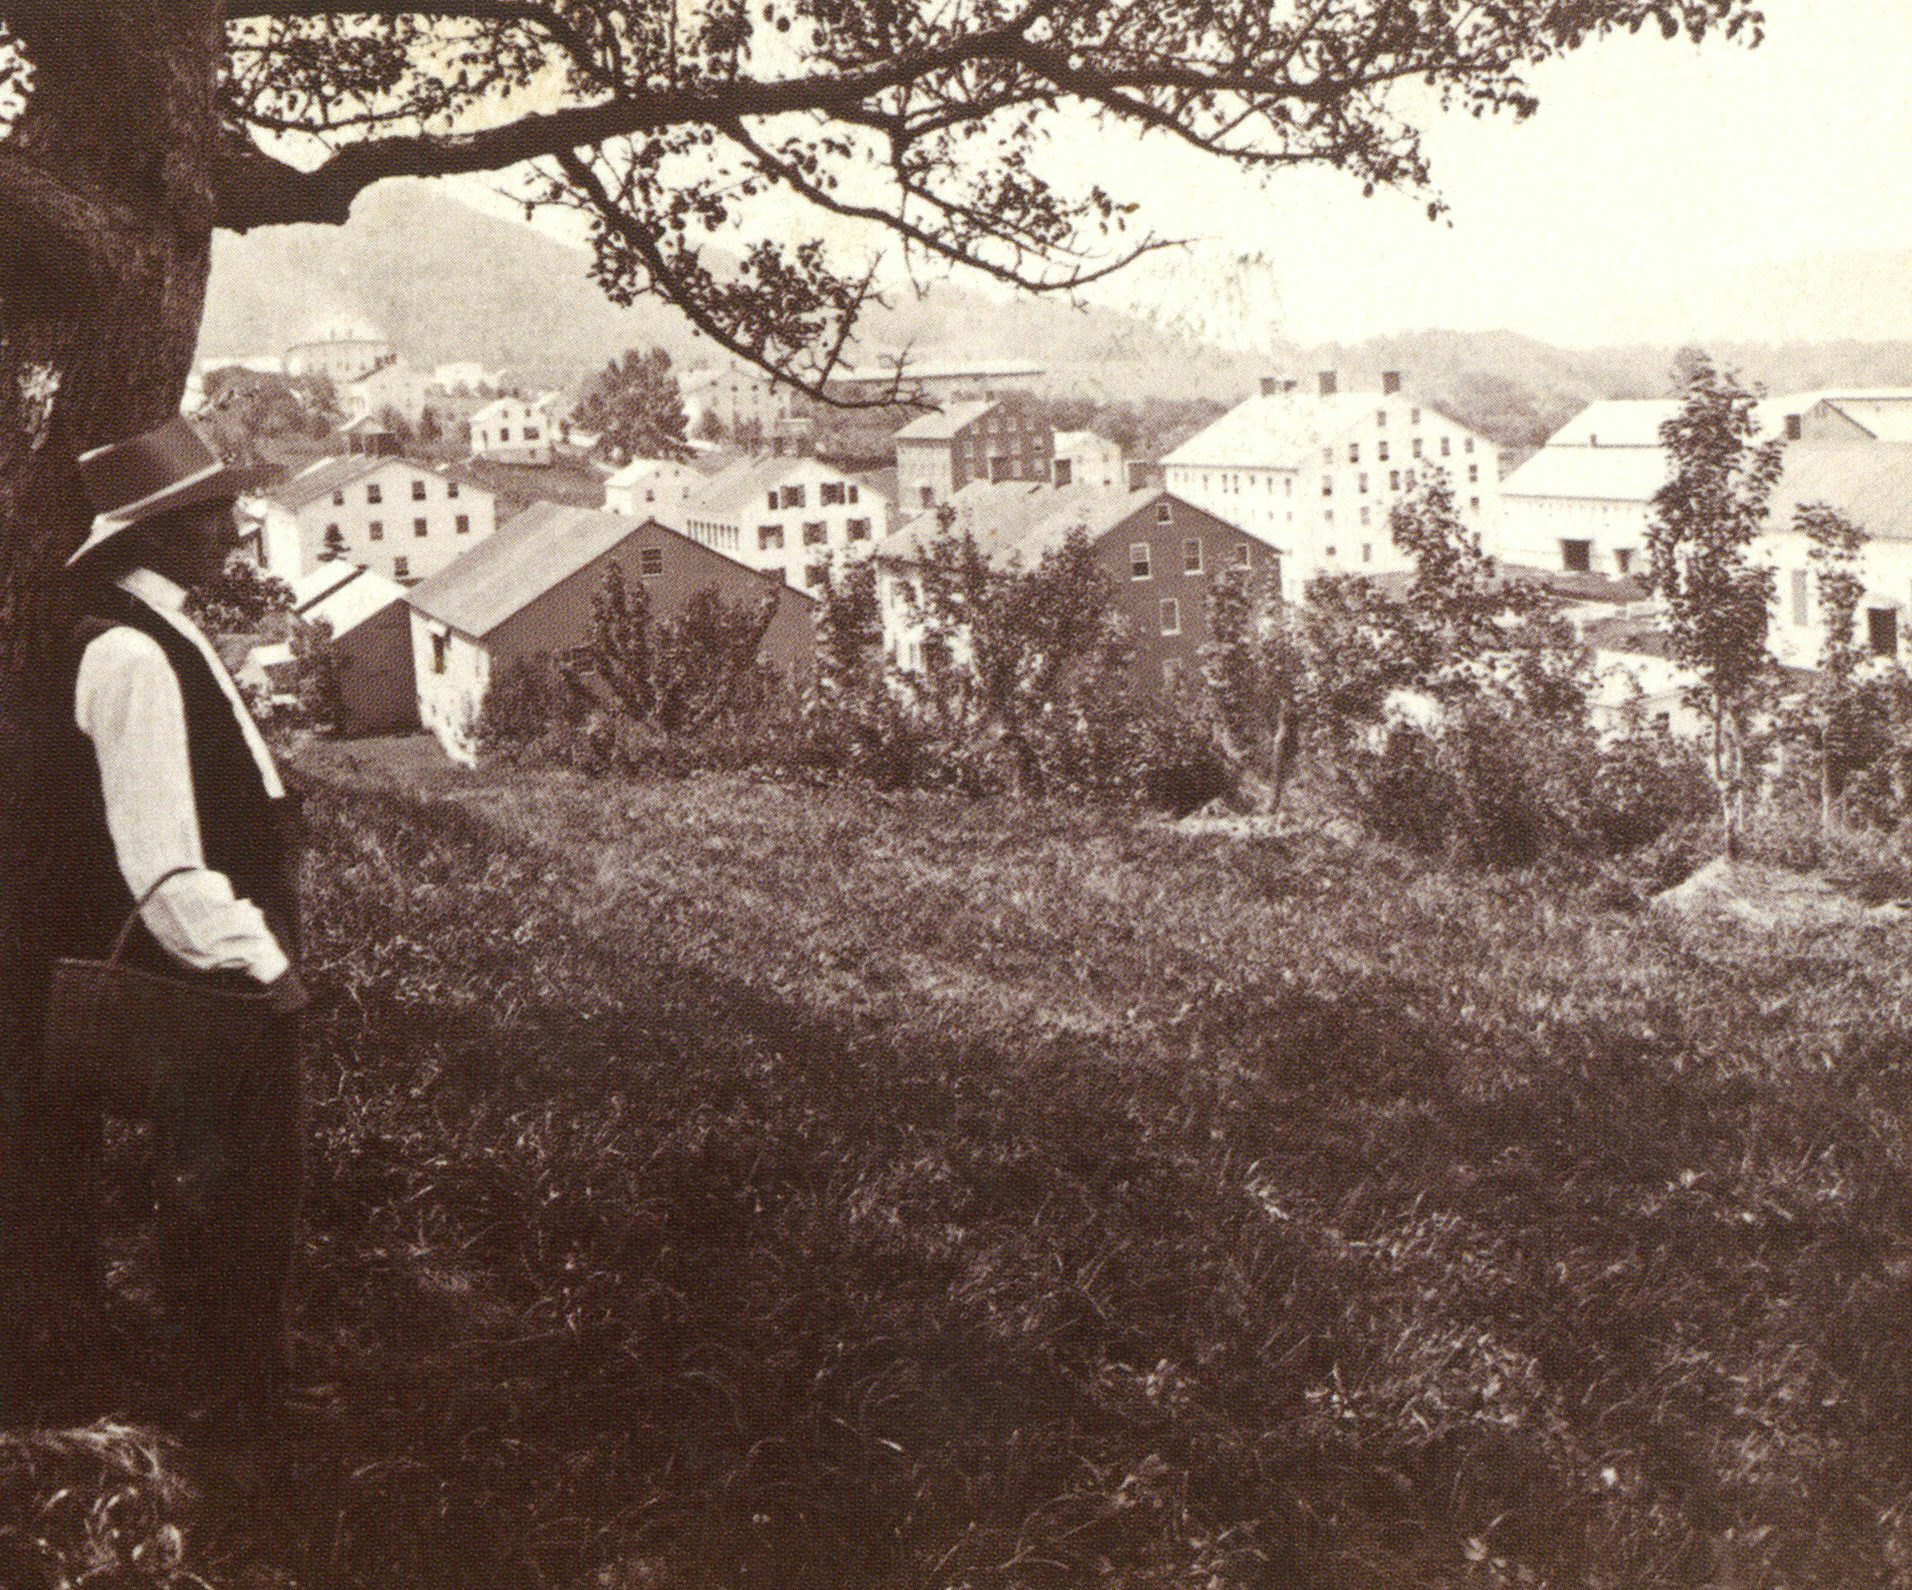 Shakers villages were strict, industrious communities, where all sorts of human behavior was regulated in pursuit of a pure, peaceful and egalitarian way of life. Church Family Elder Daniel Crosman overlooking Mount Lebanon, Oliver B. Buell, c. 1872, Collection of Jerry Grant and Sharon Koomler